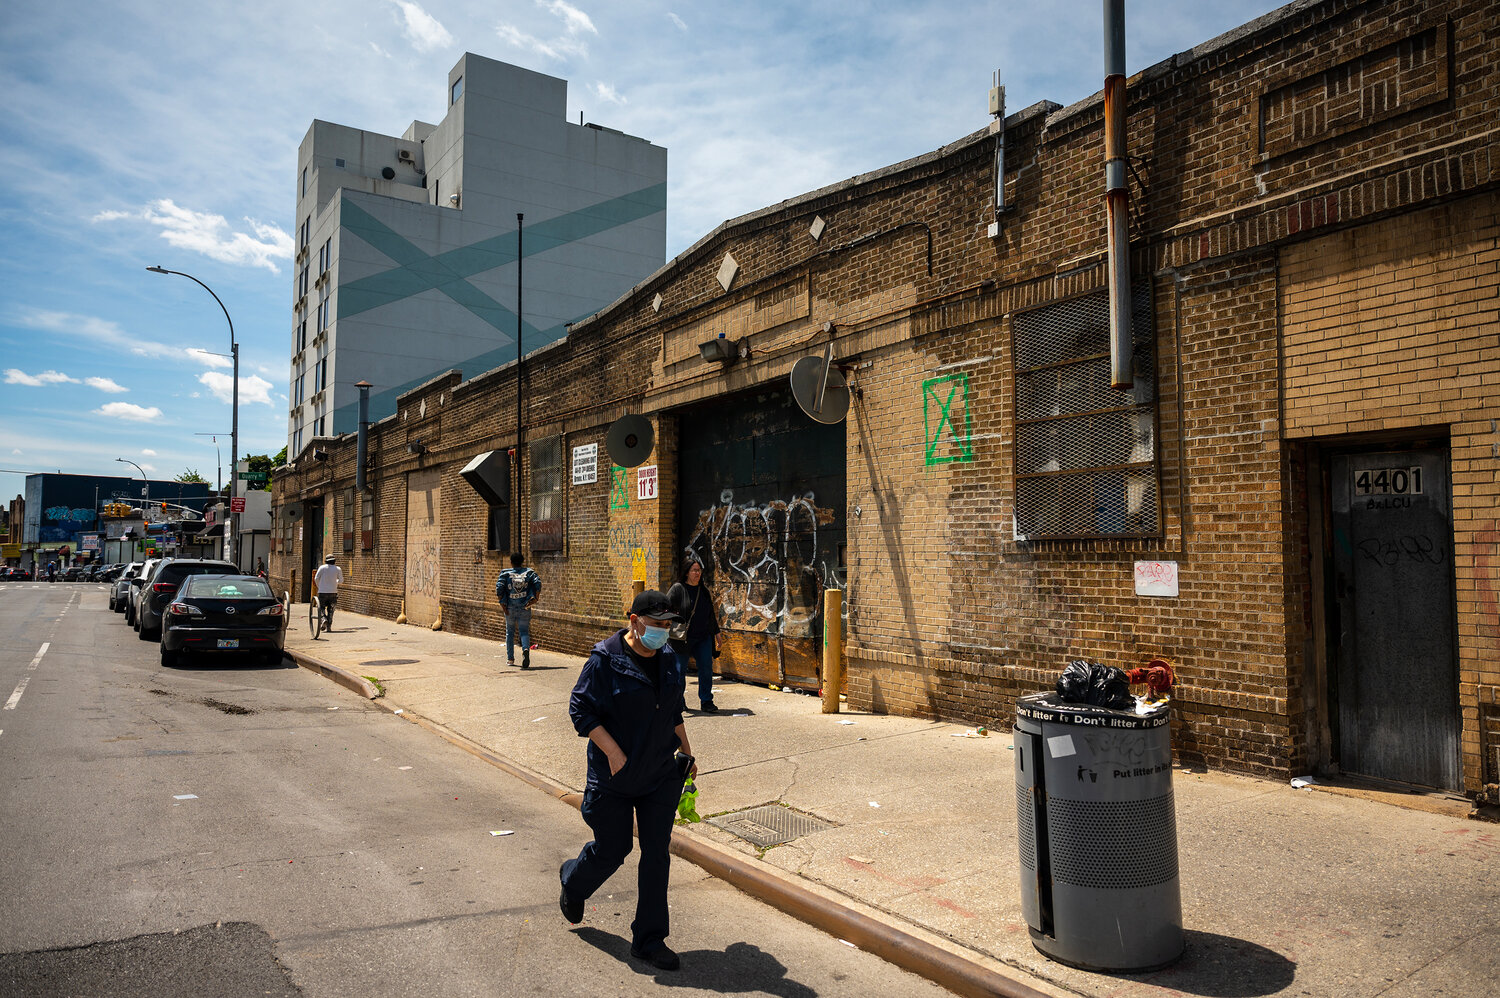 The New York City Department of Sanitation does not seem to be making much use of a shuttered facility at 4389 3rd Avenue near St. Barnabas Hospital, pictured here on Monday, May 8.